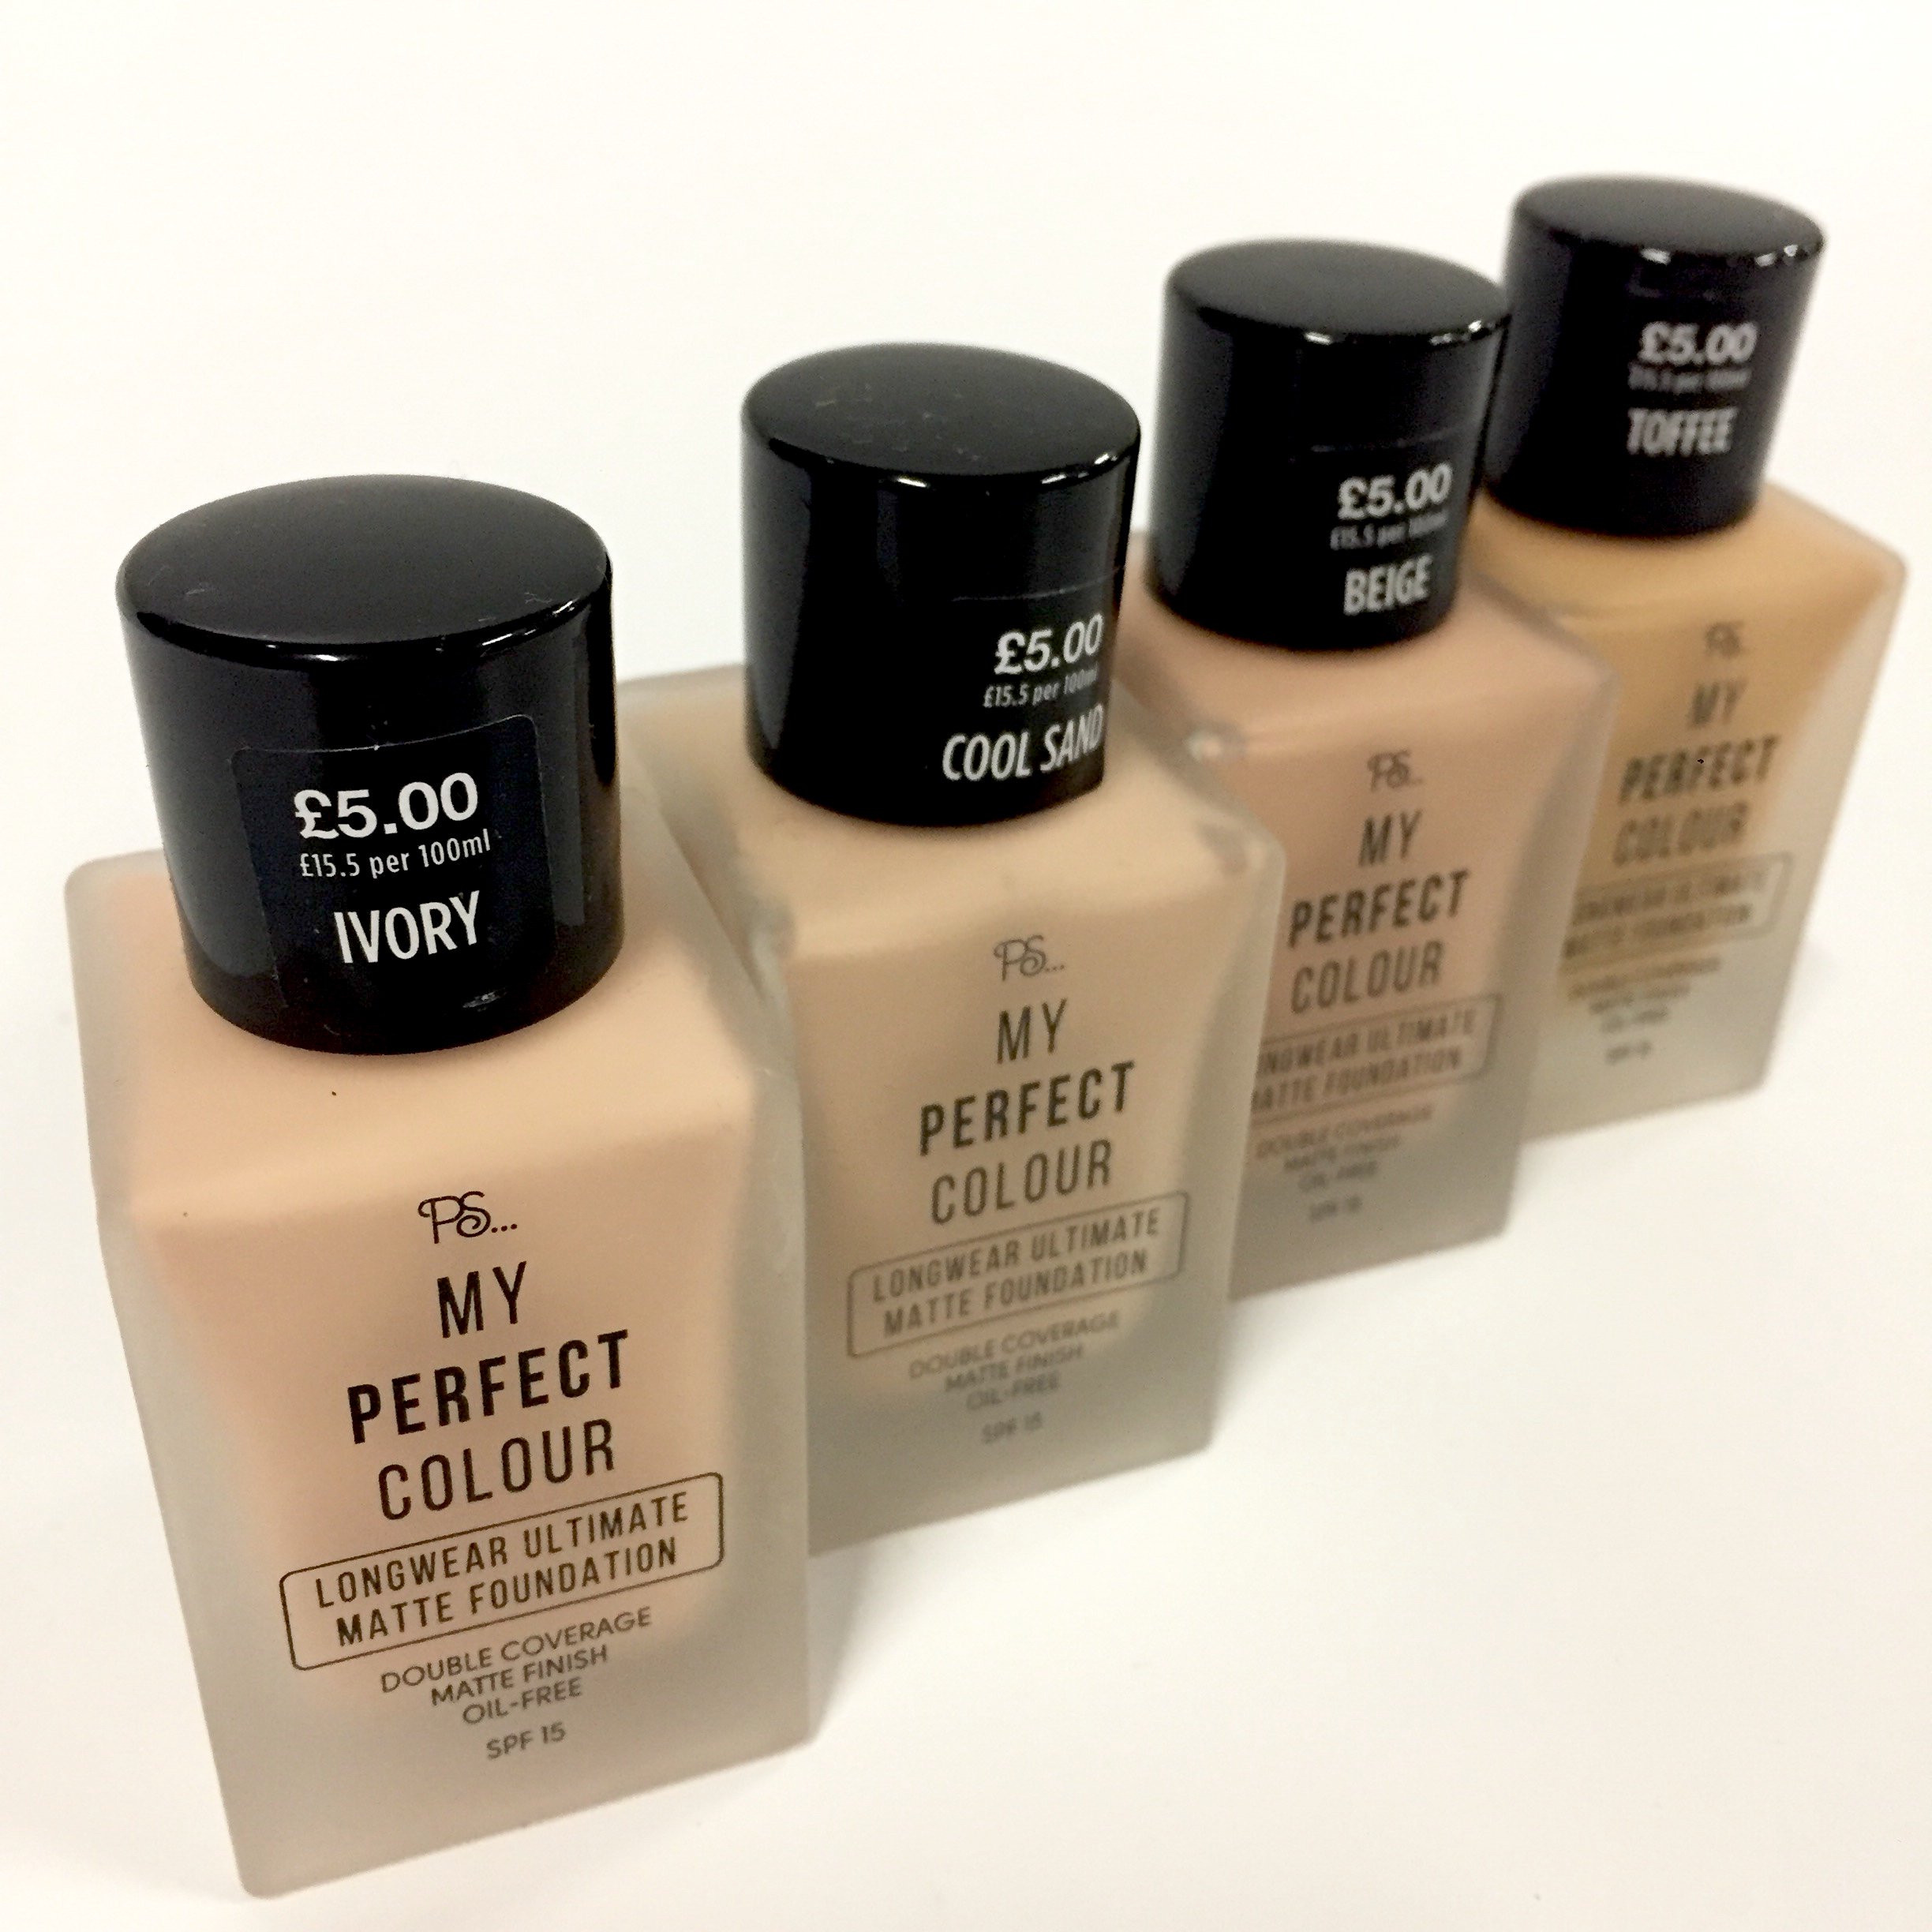 Abbey Centre on X: My perfect colour - Double coverage foundation